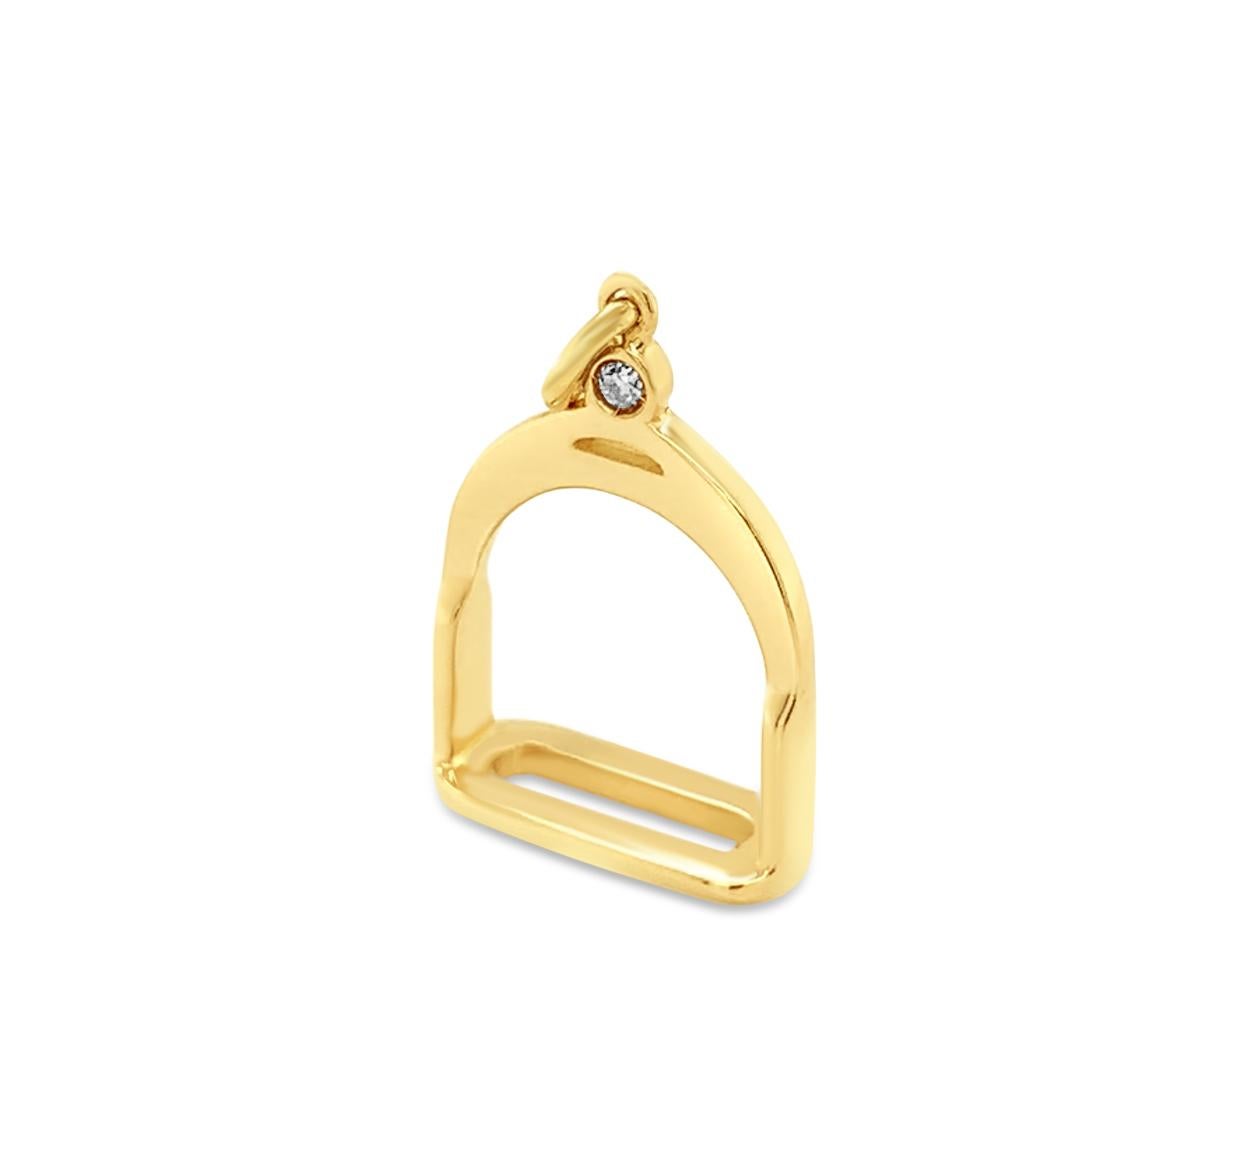 Round Cut Garavelli 18Kt Yellow Gold Diamonds Stirrups Collection Pendant Necklace For Sale